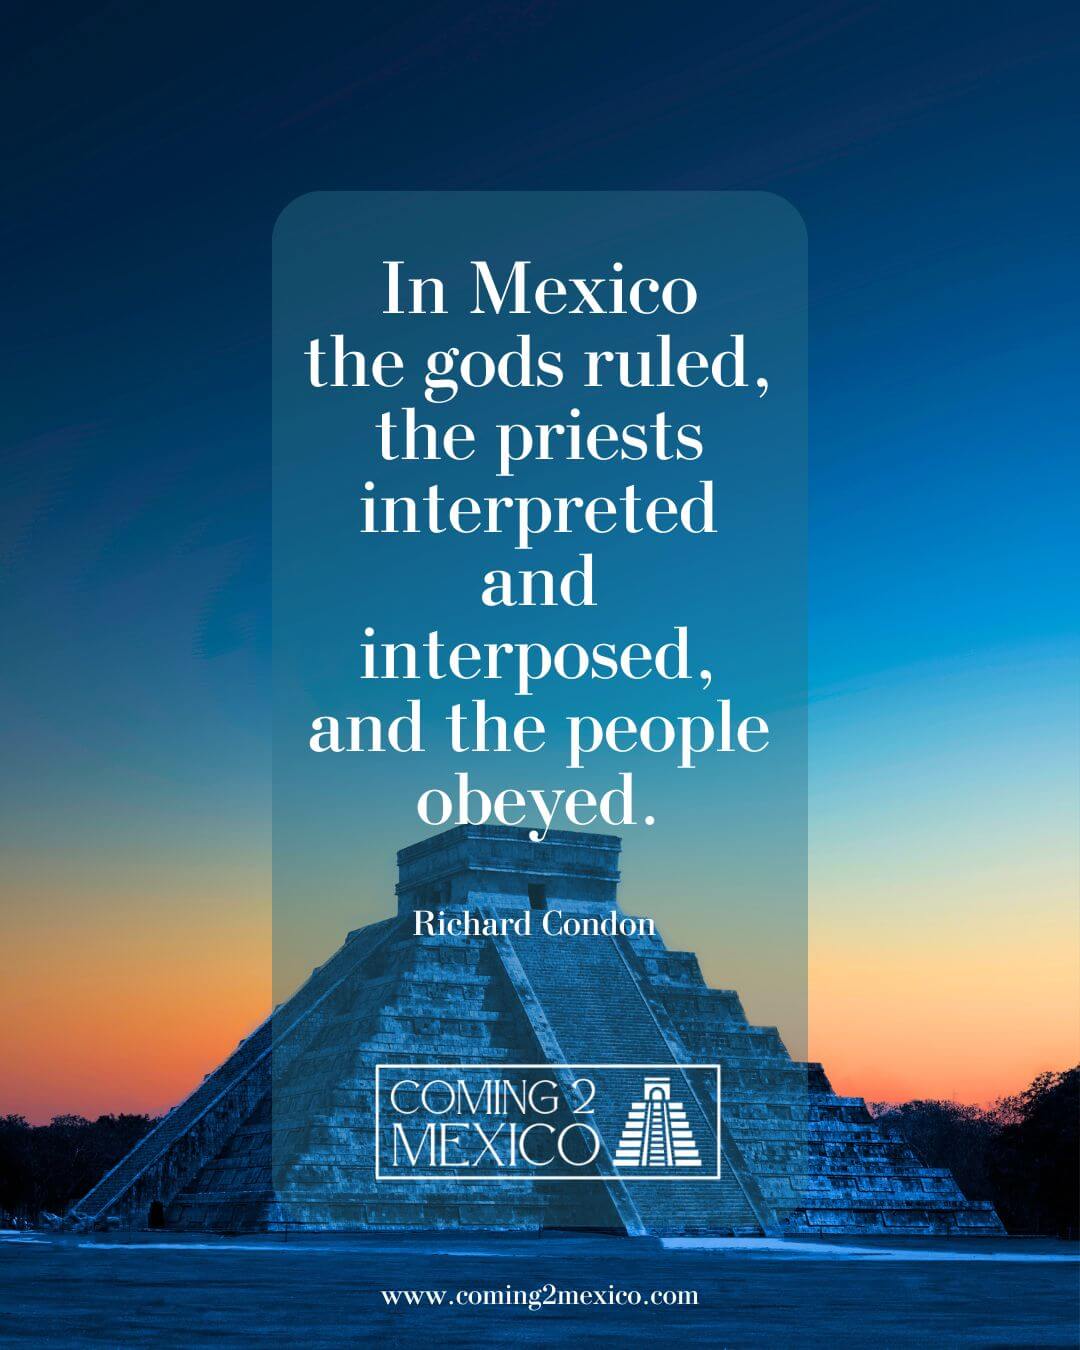 In Mexico the gods ruled, the priests interpreted and interposed, and the people obeyed.